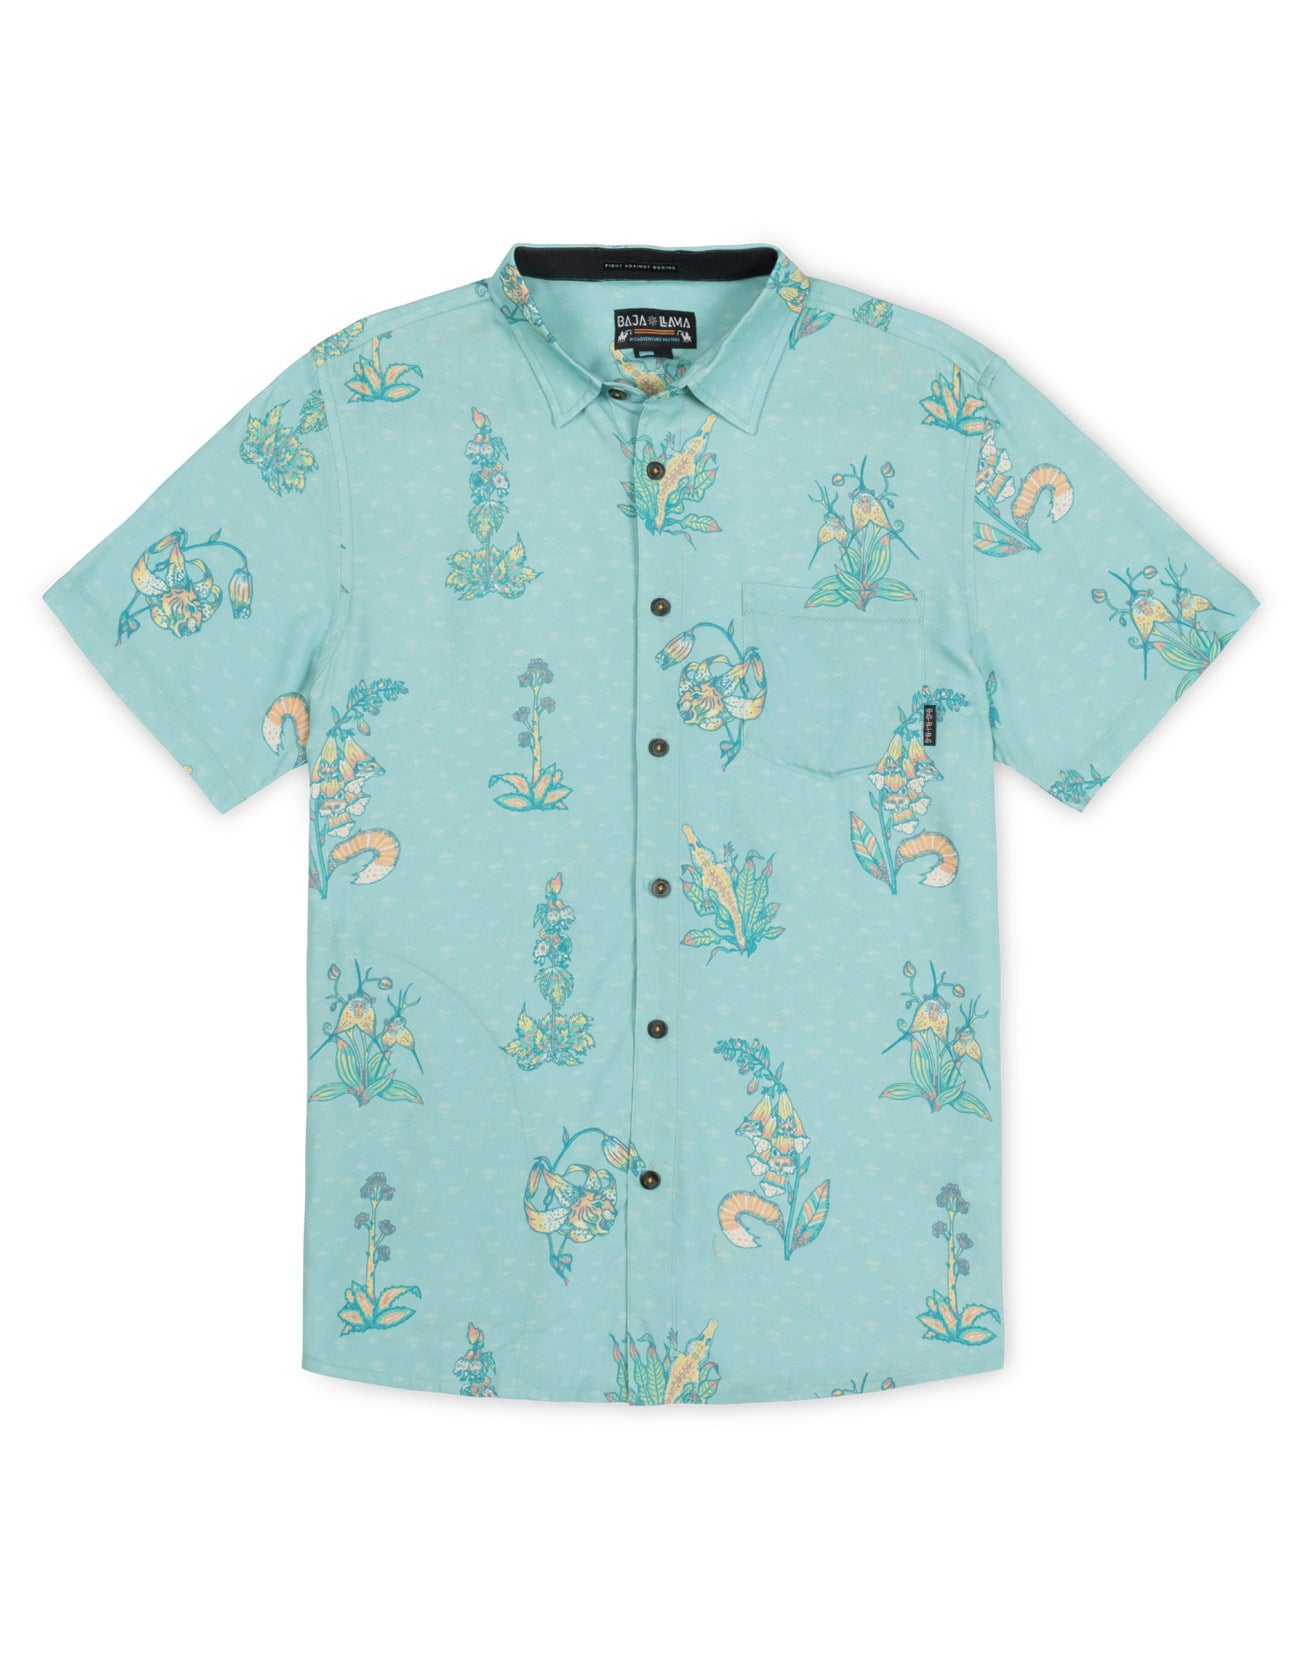 Turquoise button up shirt with yellow Tiger Lily, Foxtail and Monkey Monstera print